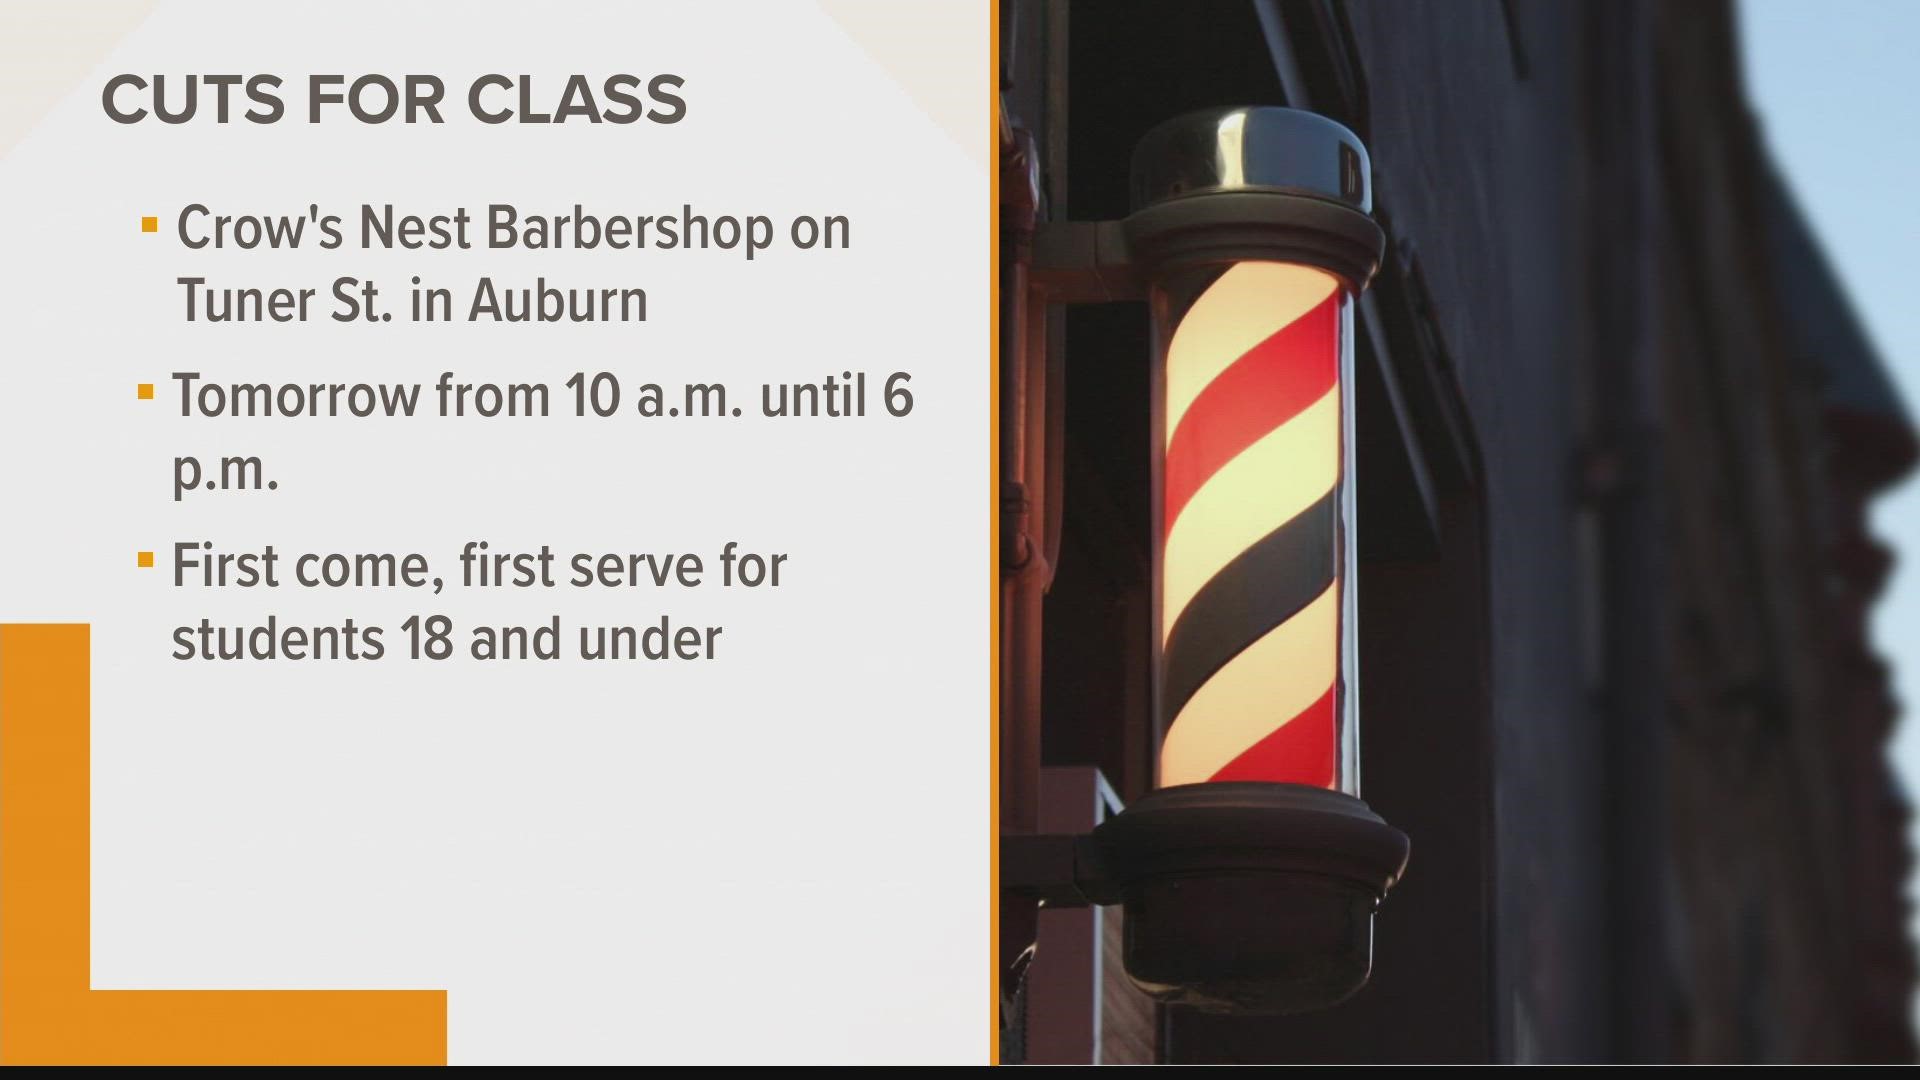 Students can get a free haircut Monday in Auburn, here's how